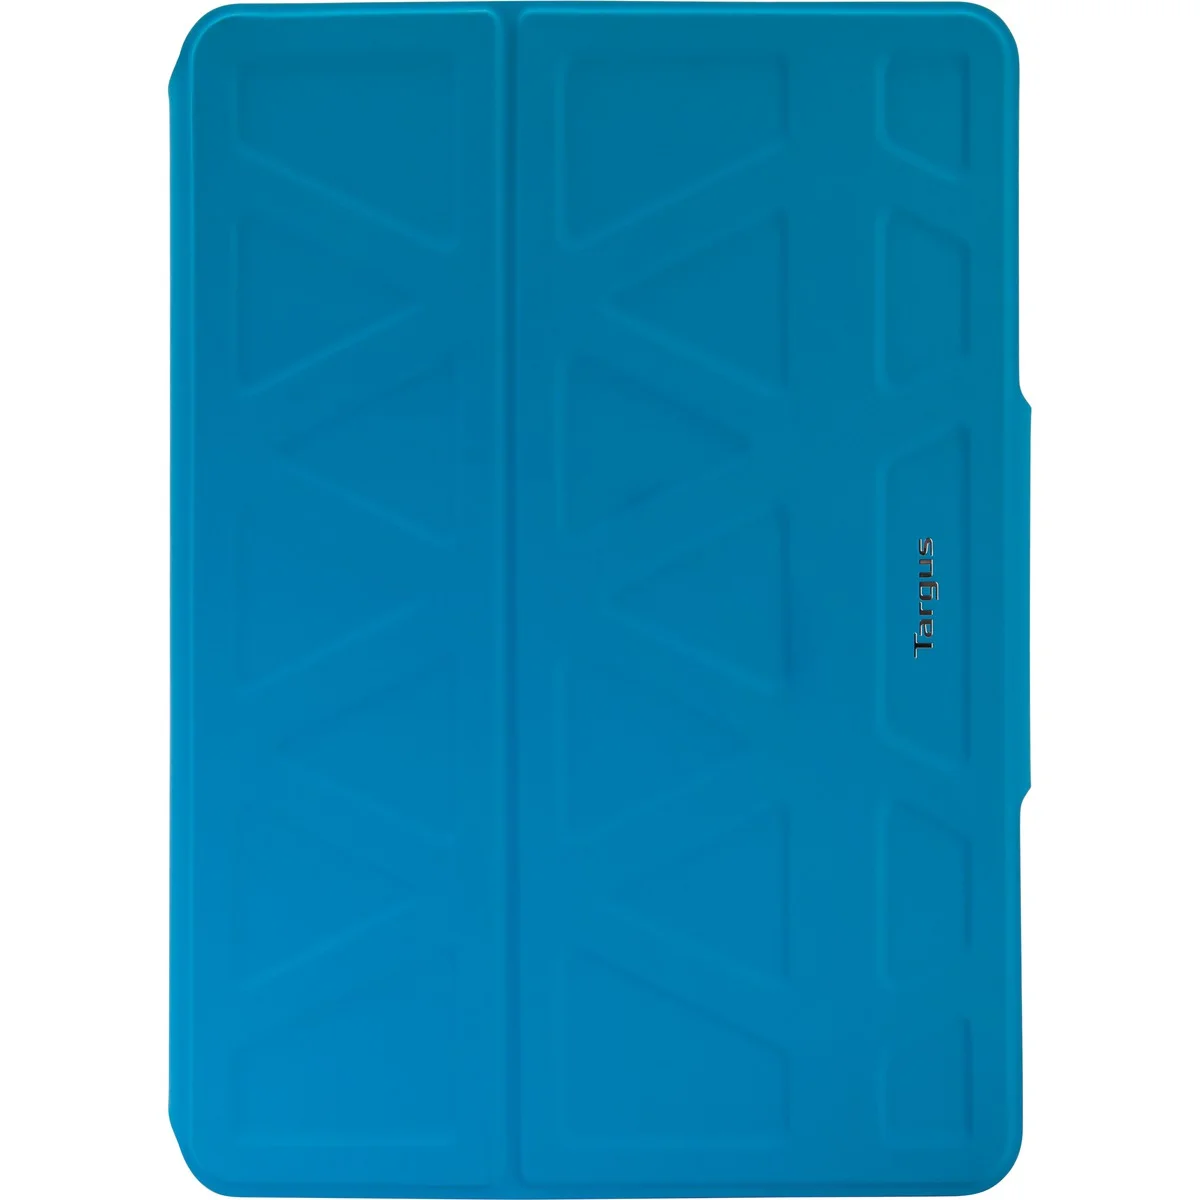 Targus 3D Protection Case for iPad 6th Gen./5th Gen., iPad Pro 9.7-inch, iPad Air 2, and iPad Air in Blue - THZ61202GL